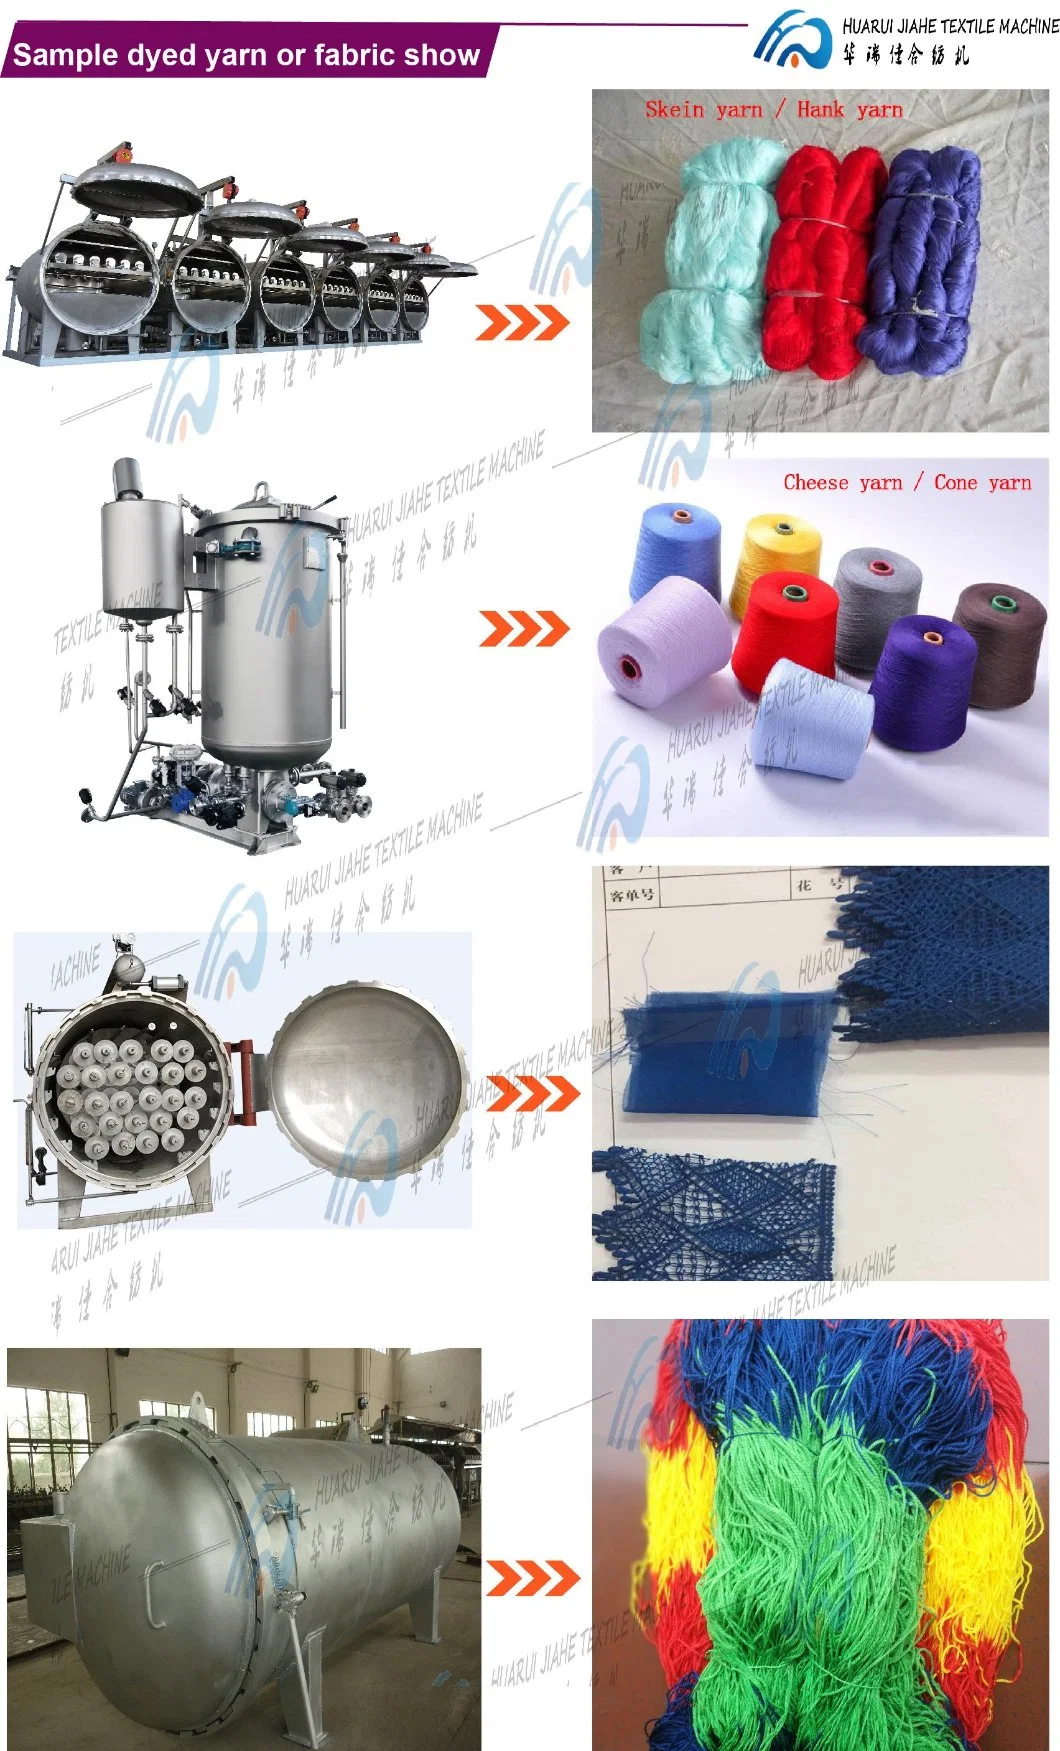 Finished Cloth Dyeing Machine for Garment Professional Energy Saving Hot Air Yarn Drying Machine 60Hz Fabric and Yarn Dyeing Drying Machine for Samples